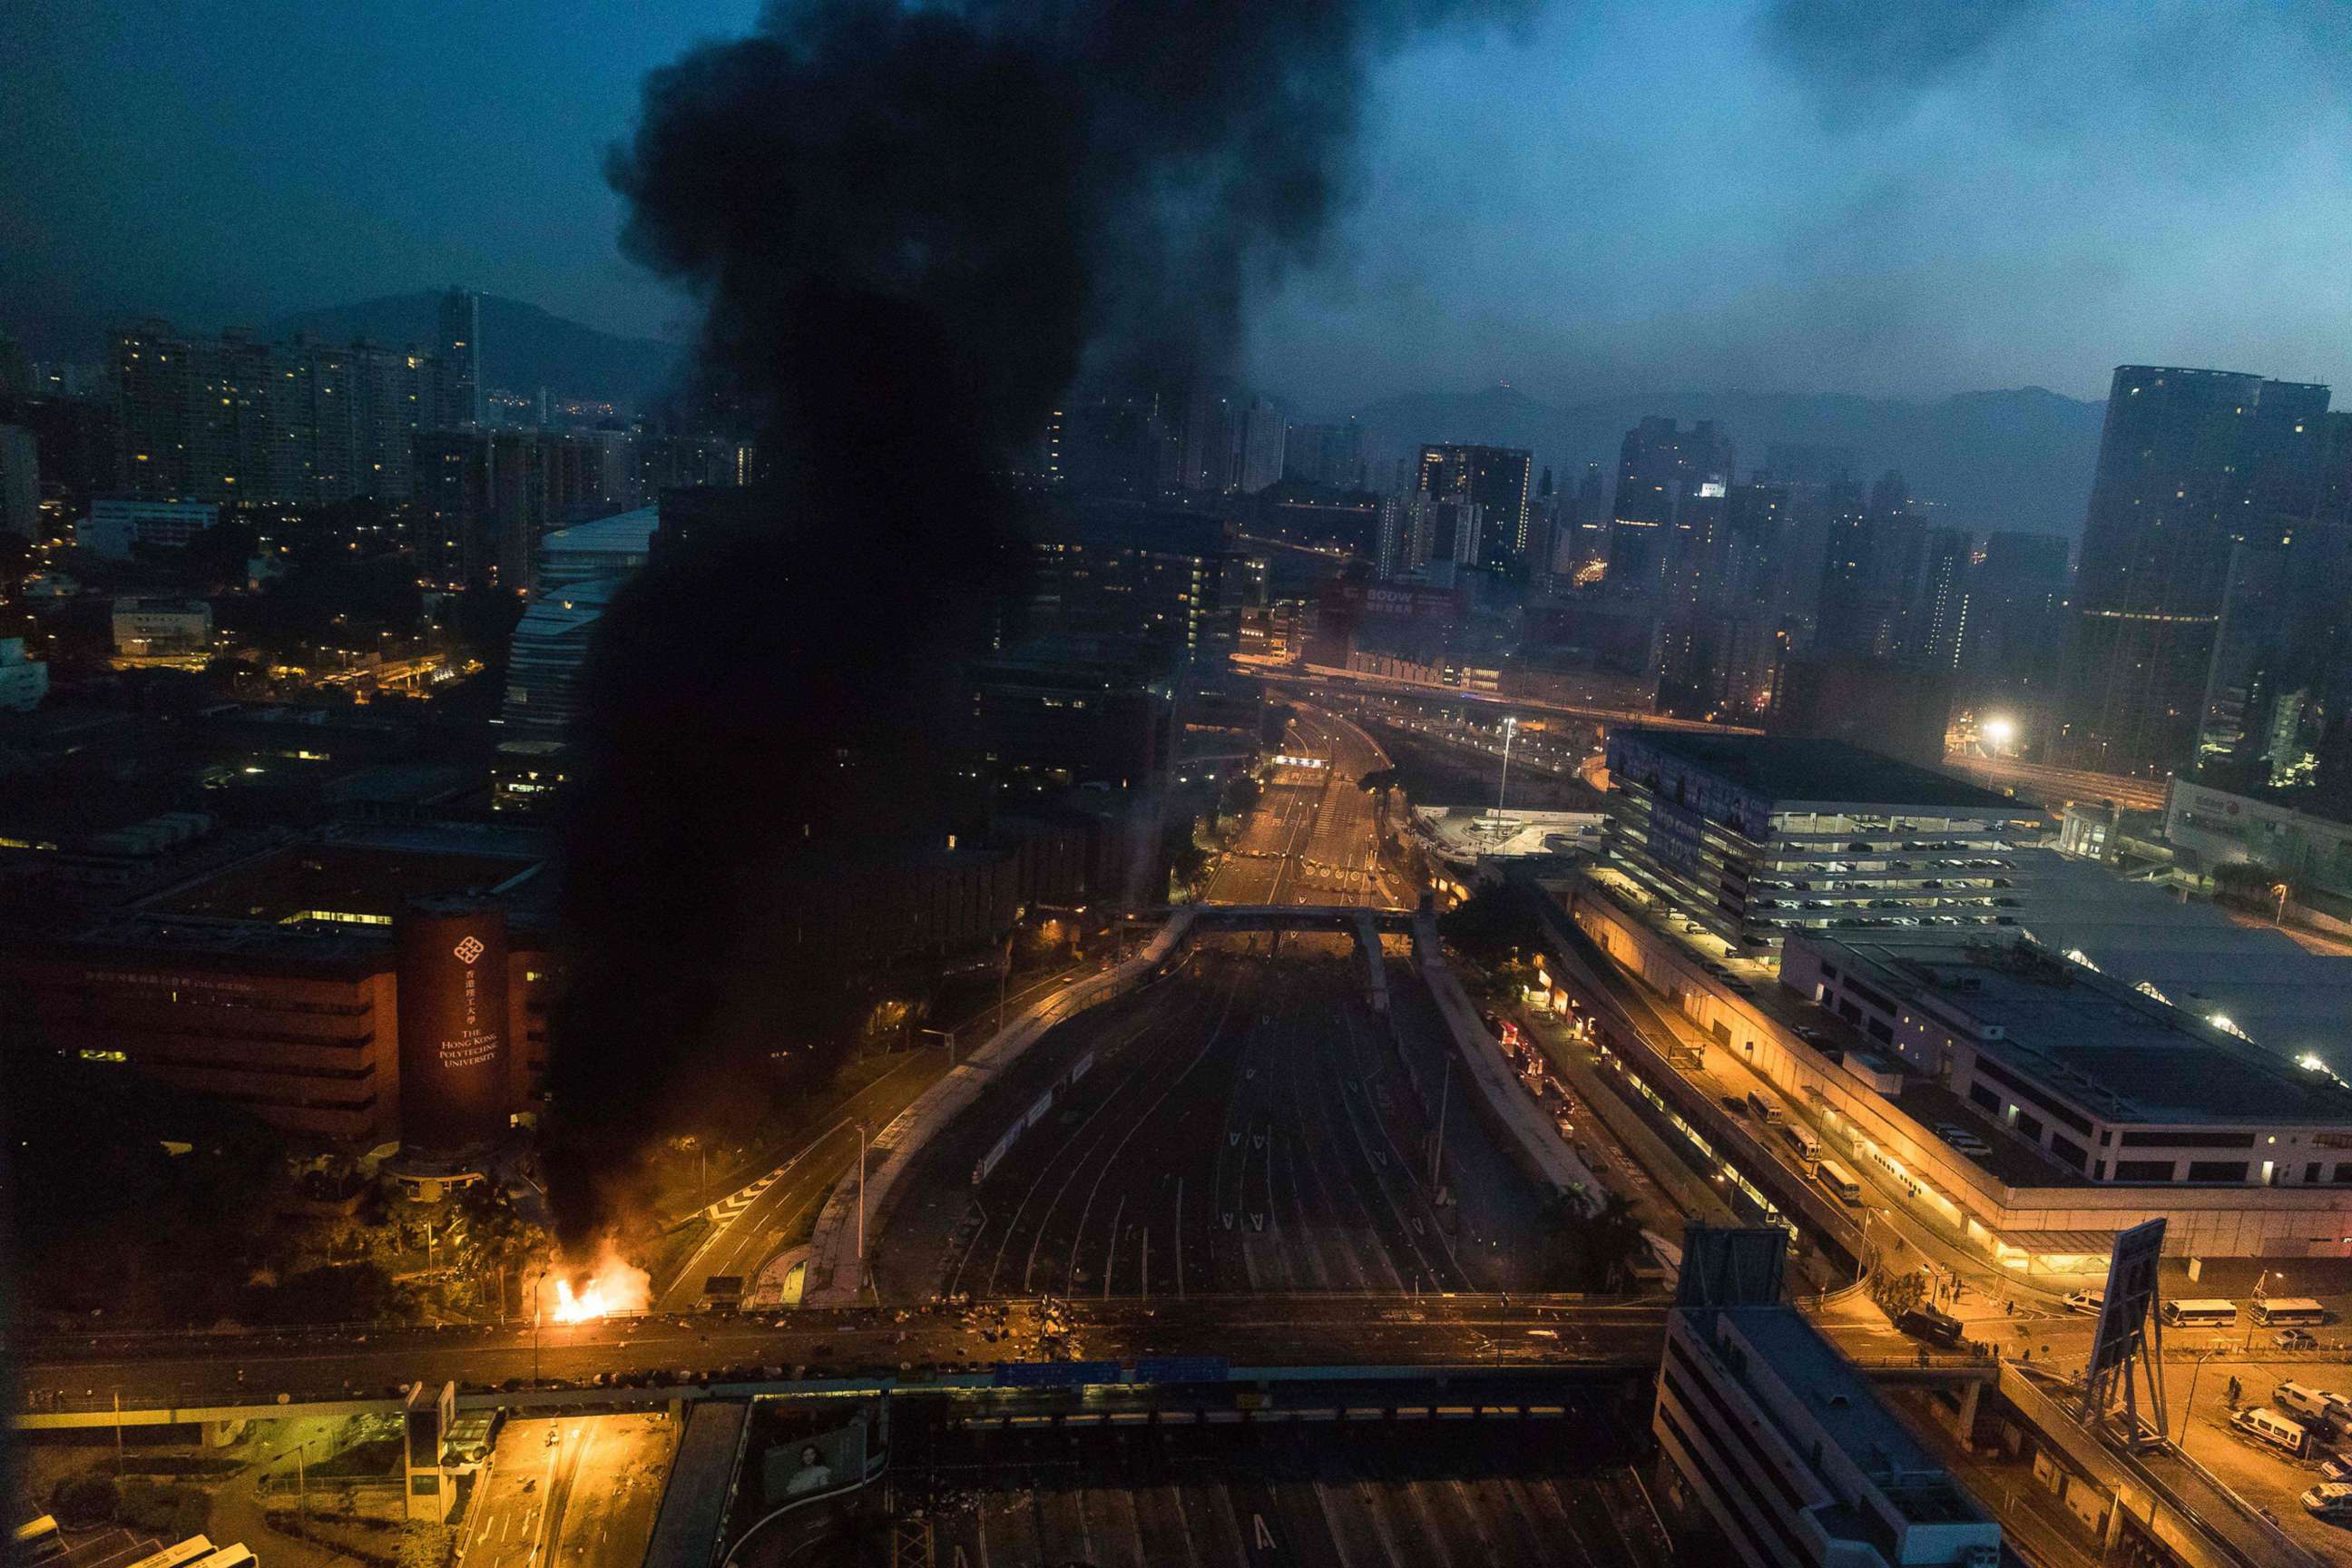 PHOTO: Smoke billows from a fire next to Hong Kong Polytechnic University and the road leading to the Cross Harbour Tunnel in Hung Hom district of Hong Kong on Nov. 18, 2019.